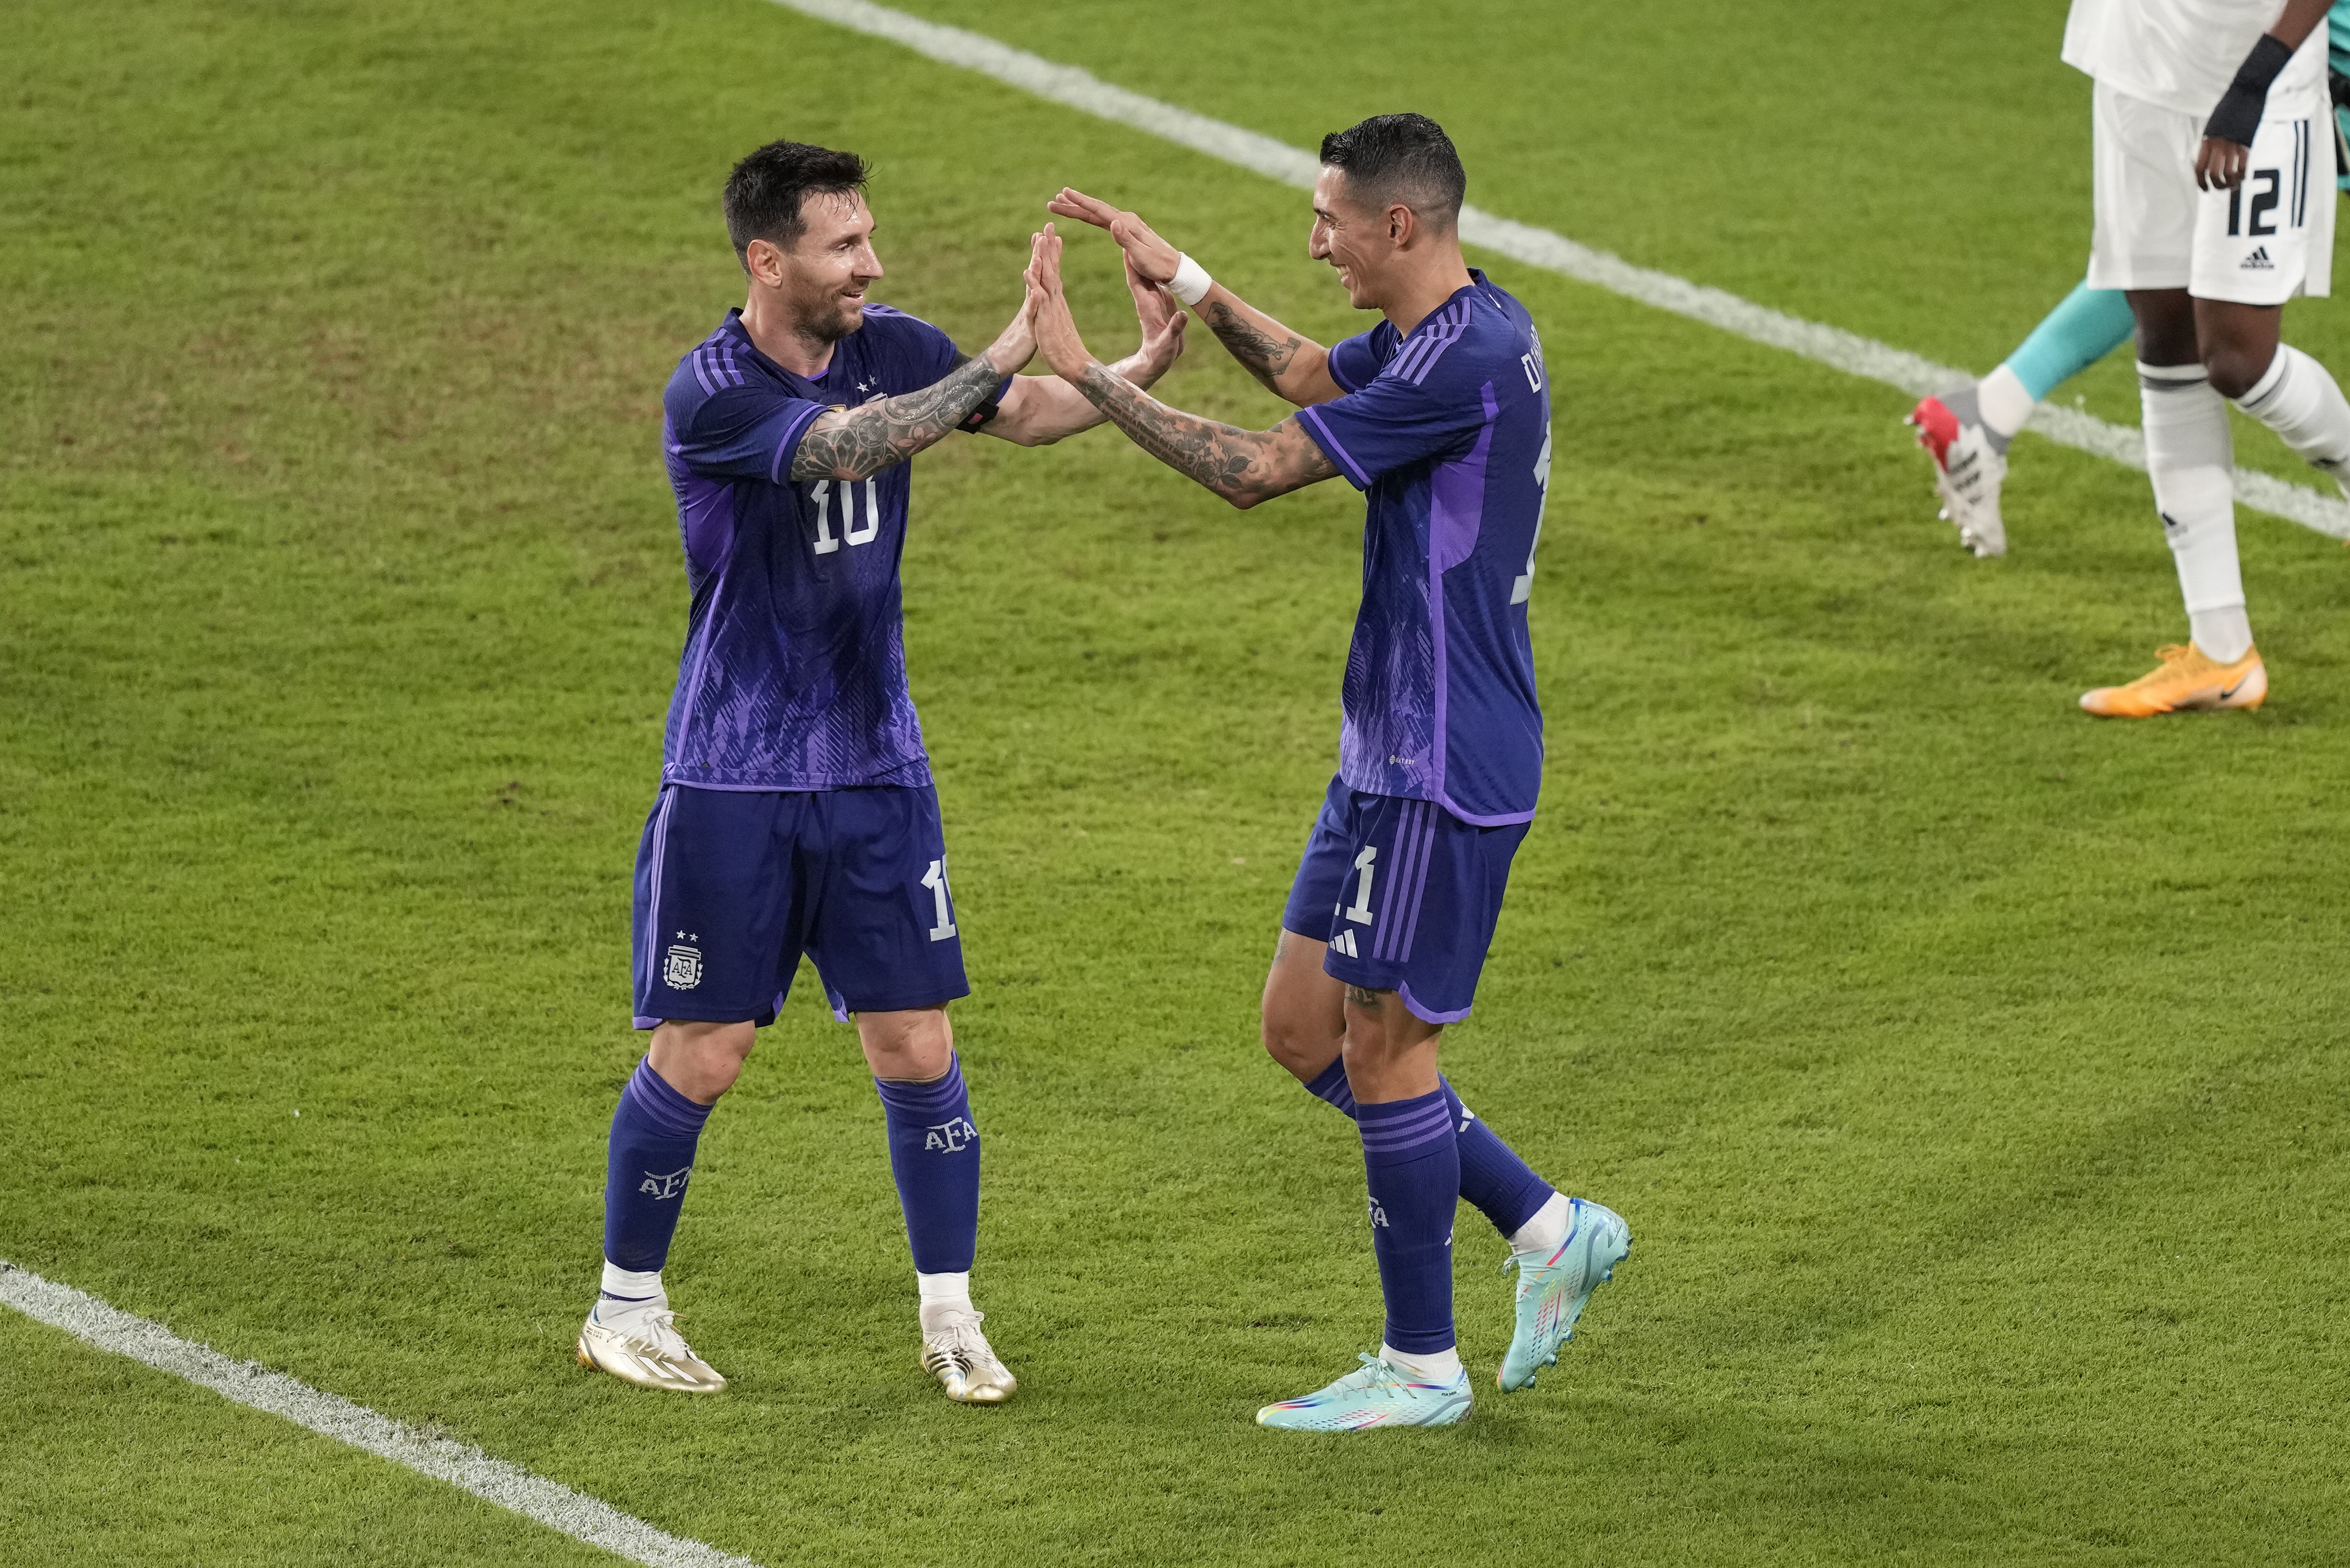 Lionel Messi scores as Argentina routs UAE 5-0 in World Cup warmup